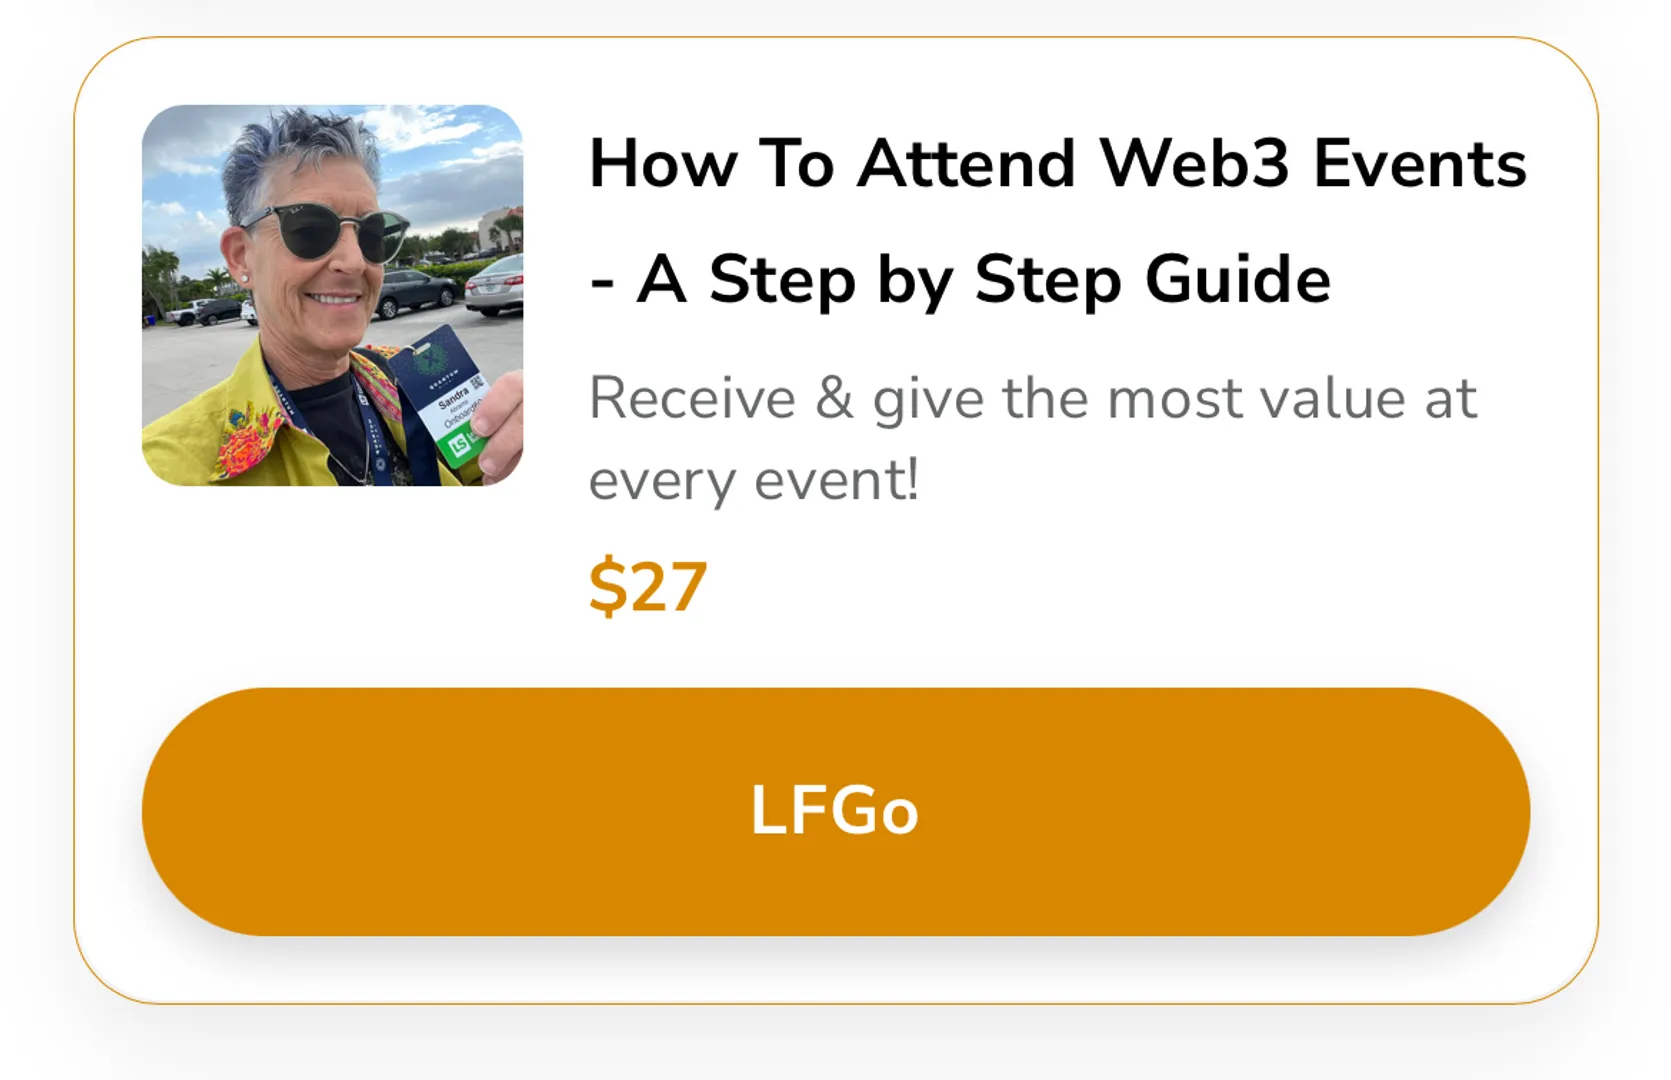 GET THE E-GUIDE TODAY!!  

Are you going to any conferences, events and want to maximize your time while there? Get the most out of every event and give the most value while there. Prep, connect and follow up step by step to ensure you get the highest value. 

https://stan.store/onboard60